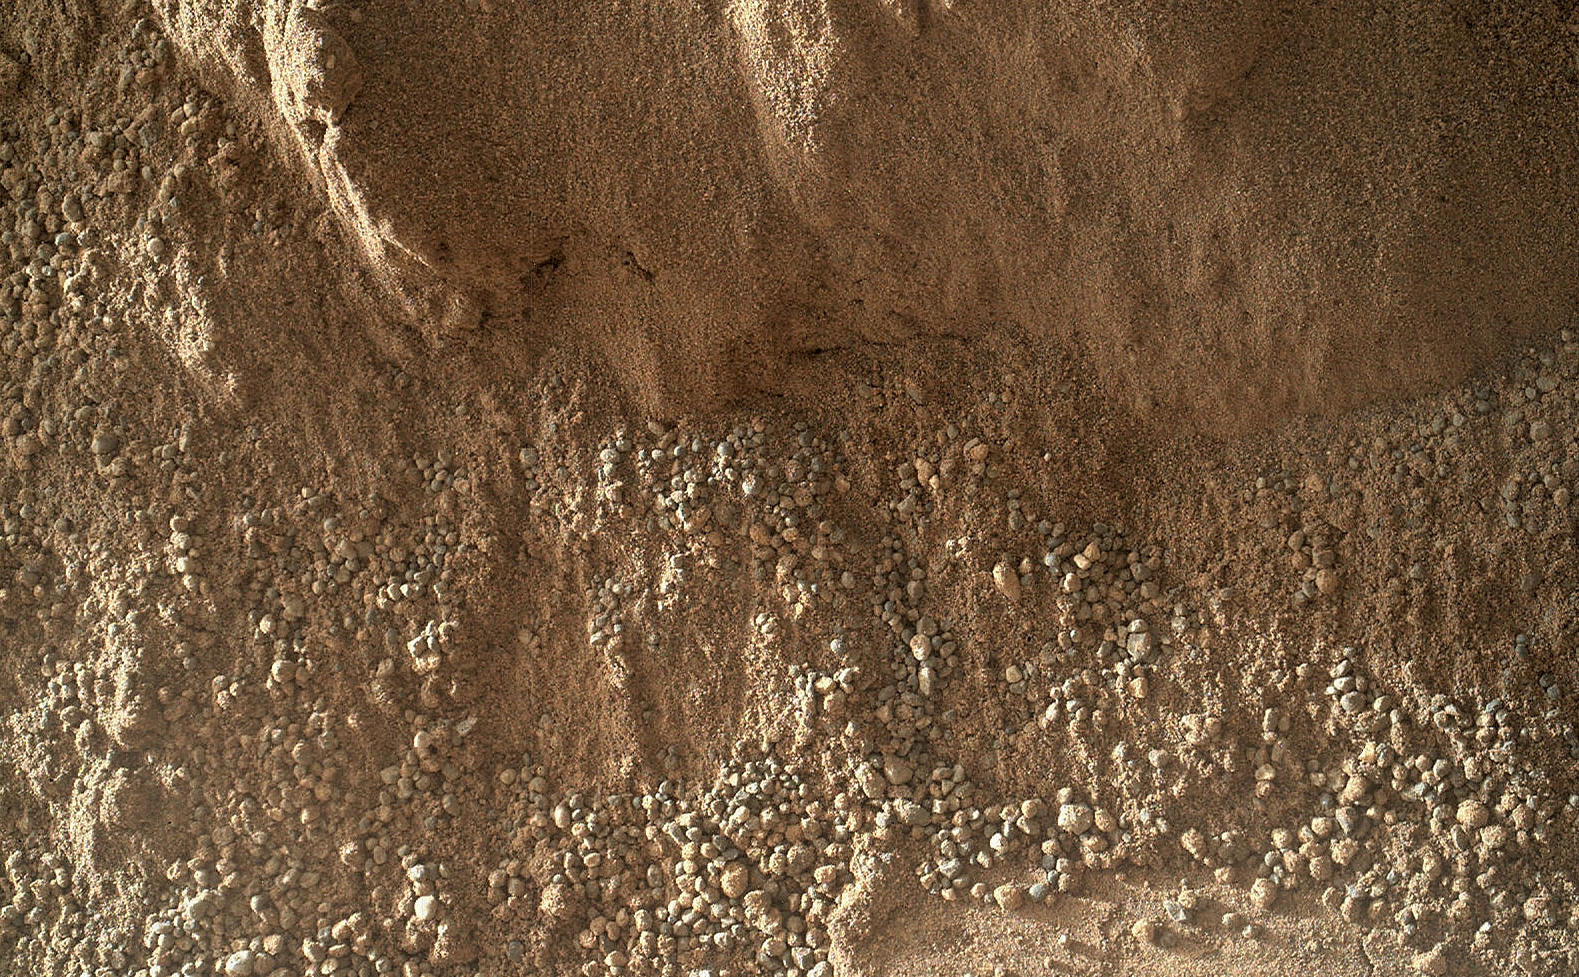 High-Resolution View of Cross-Section Through a Mars Ripple